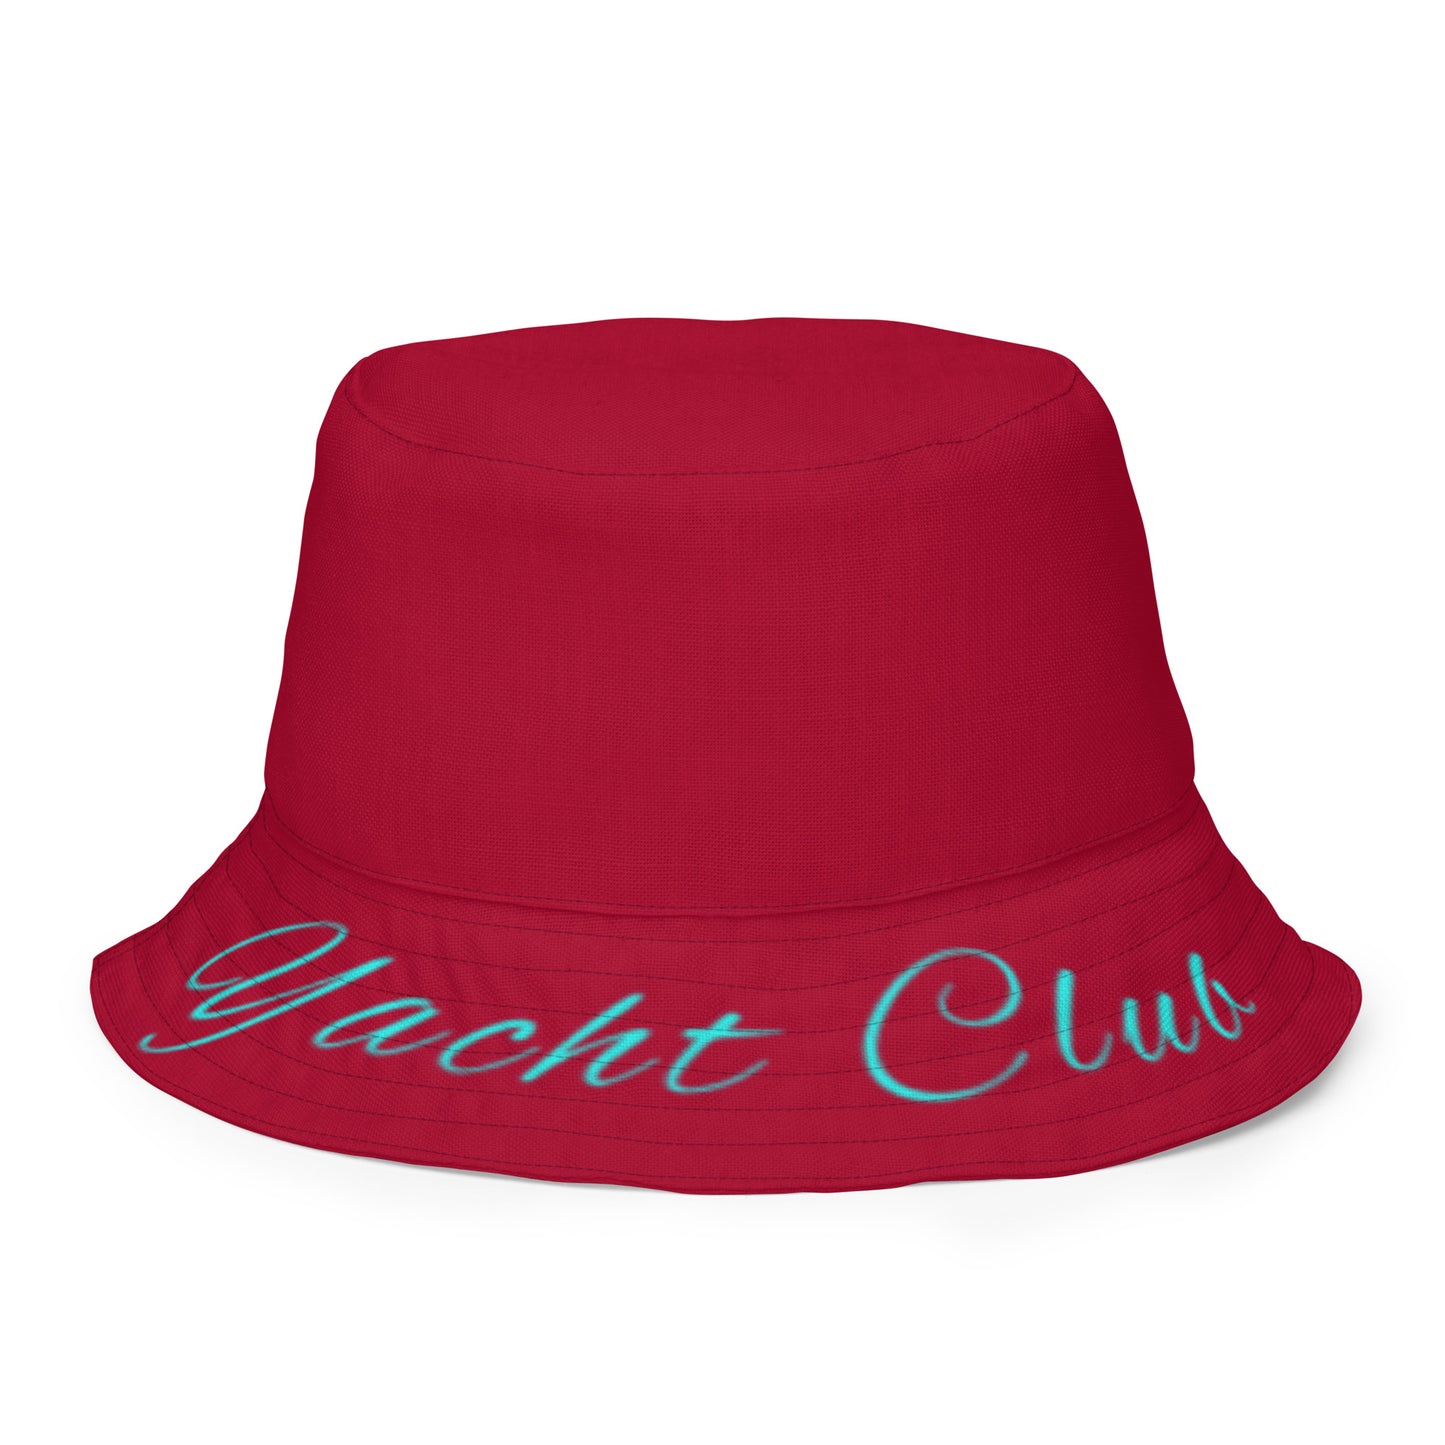 Yacht Life Roots Are Forever Reversible bucket hat